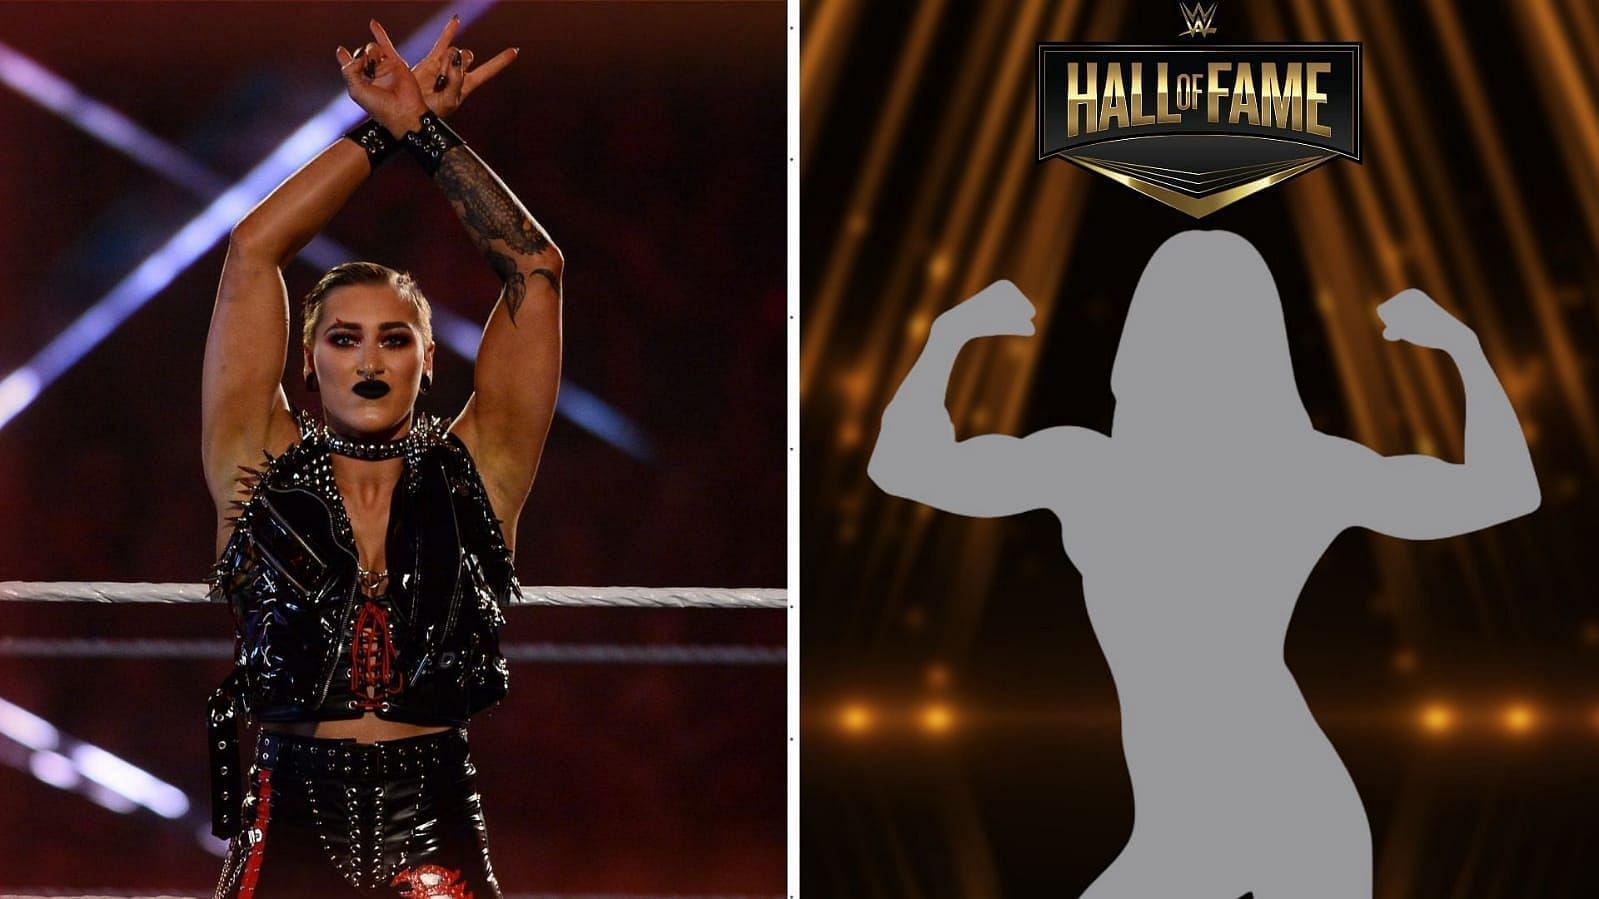 Rhea Ripley would love to lock horns with WWE Hall of Famer!